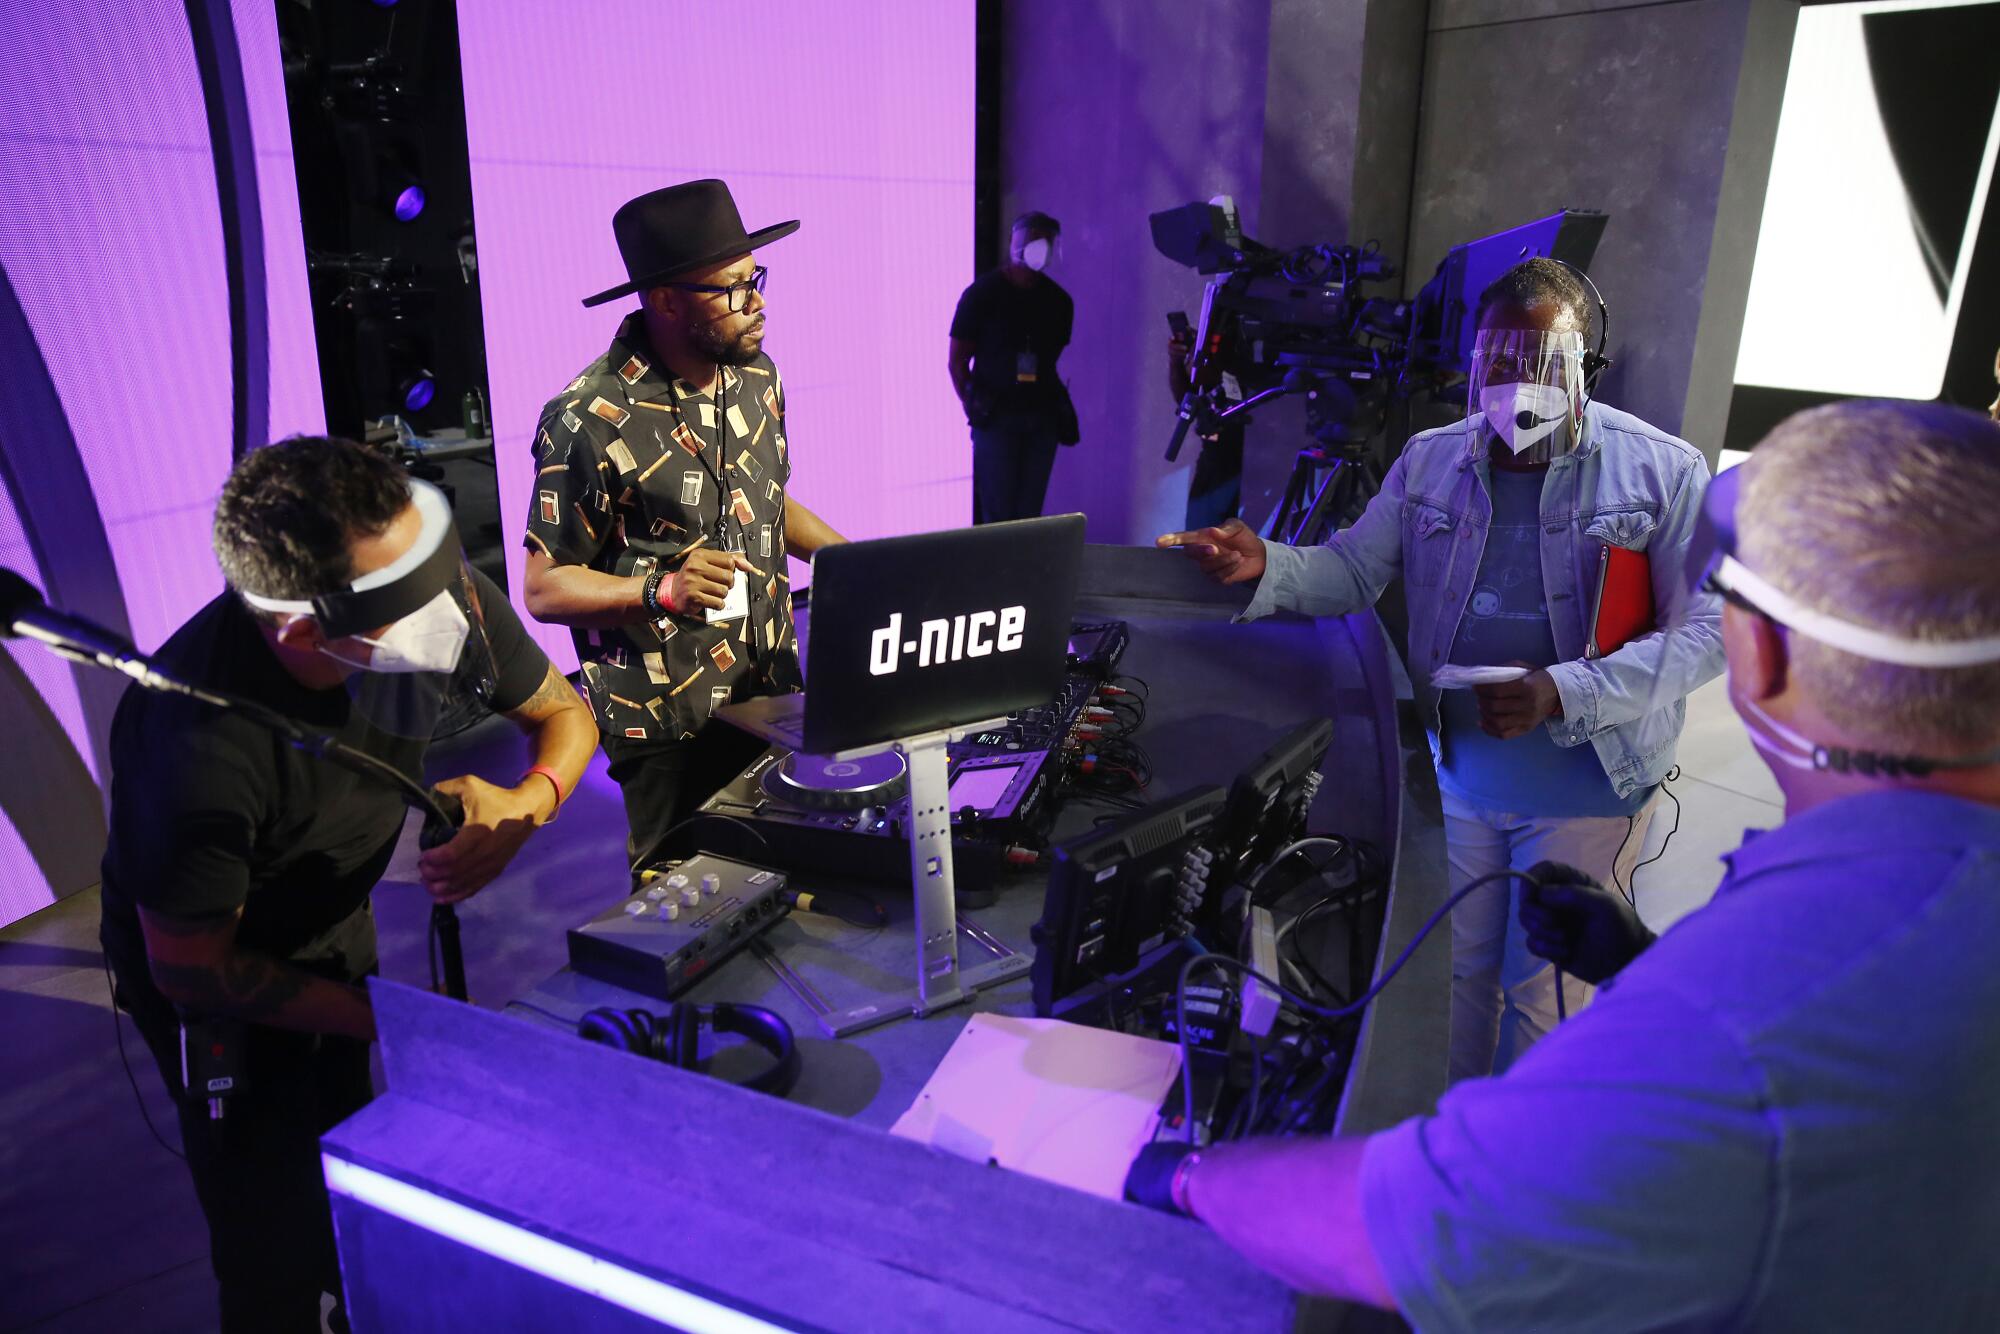 D-Nice, known as Derrick Jones, a DJ, rapper and producer, sets up onstage during rehearsals.